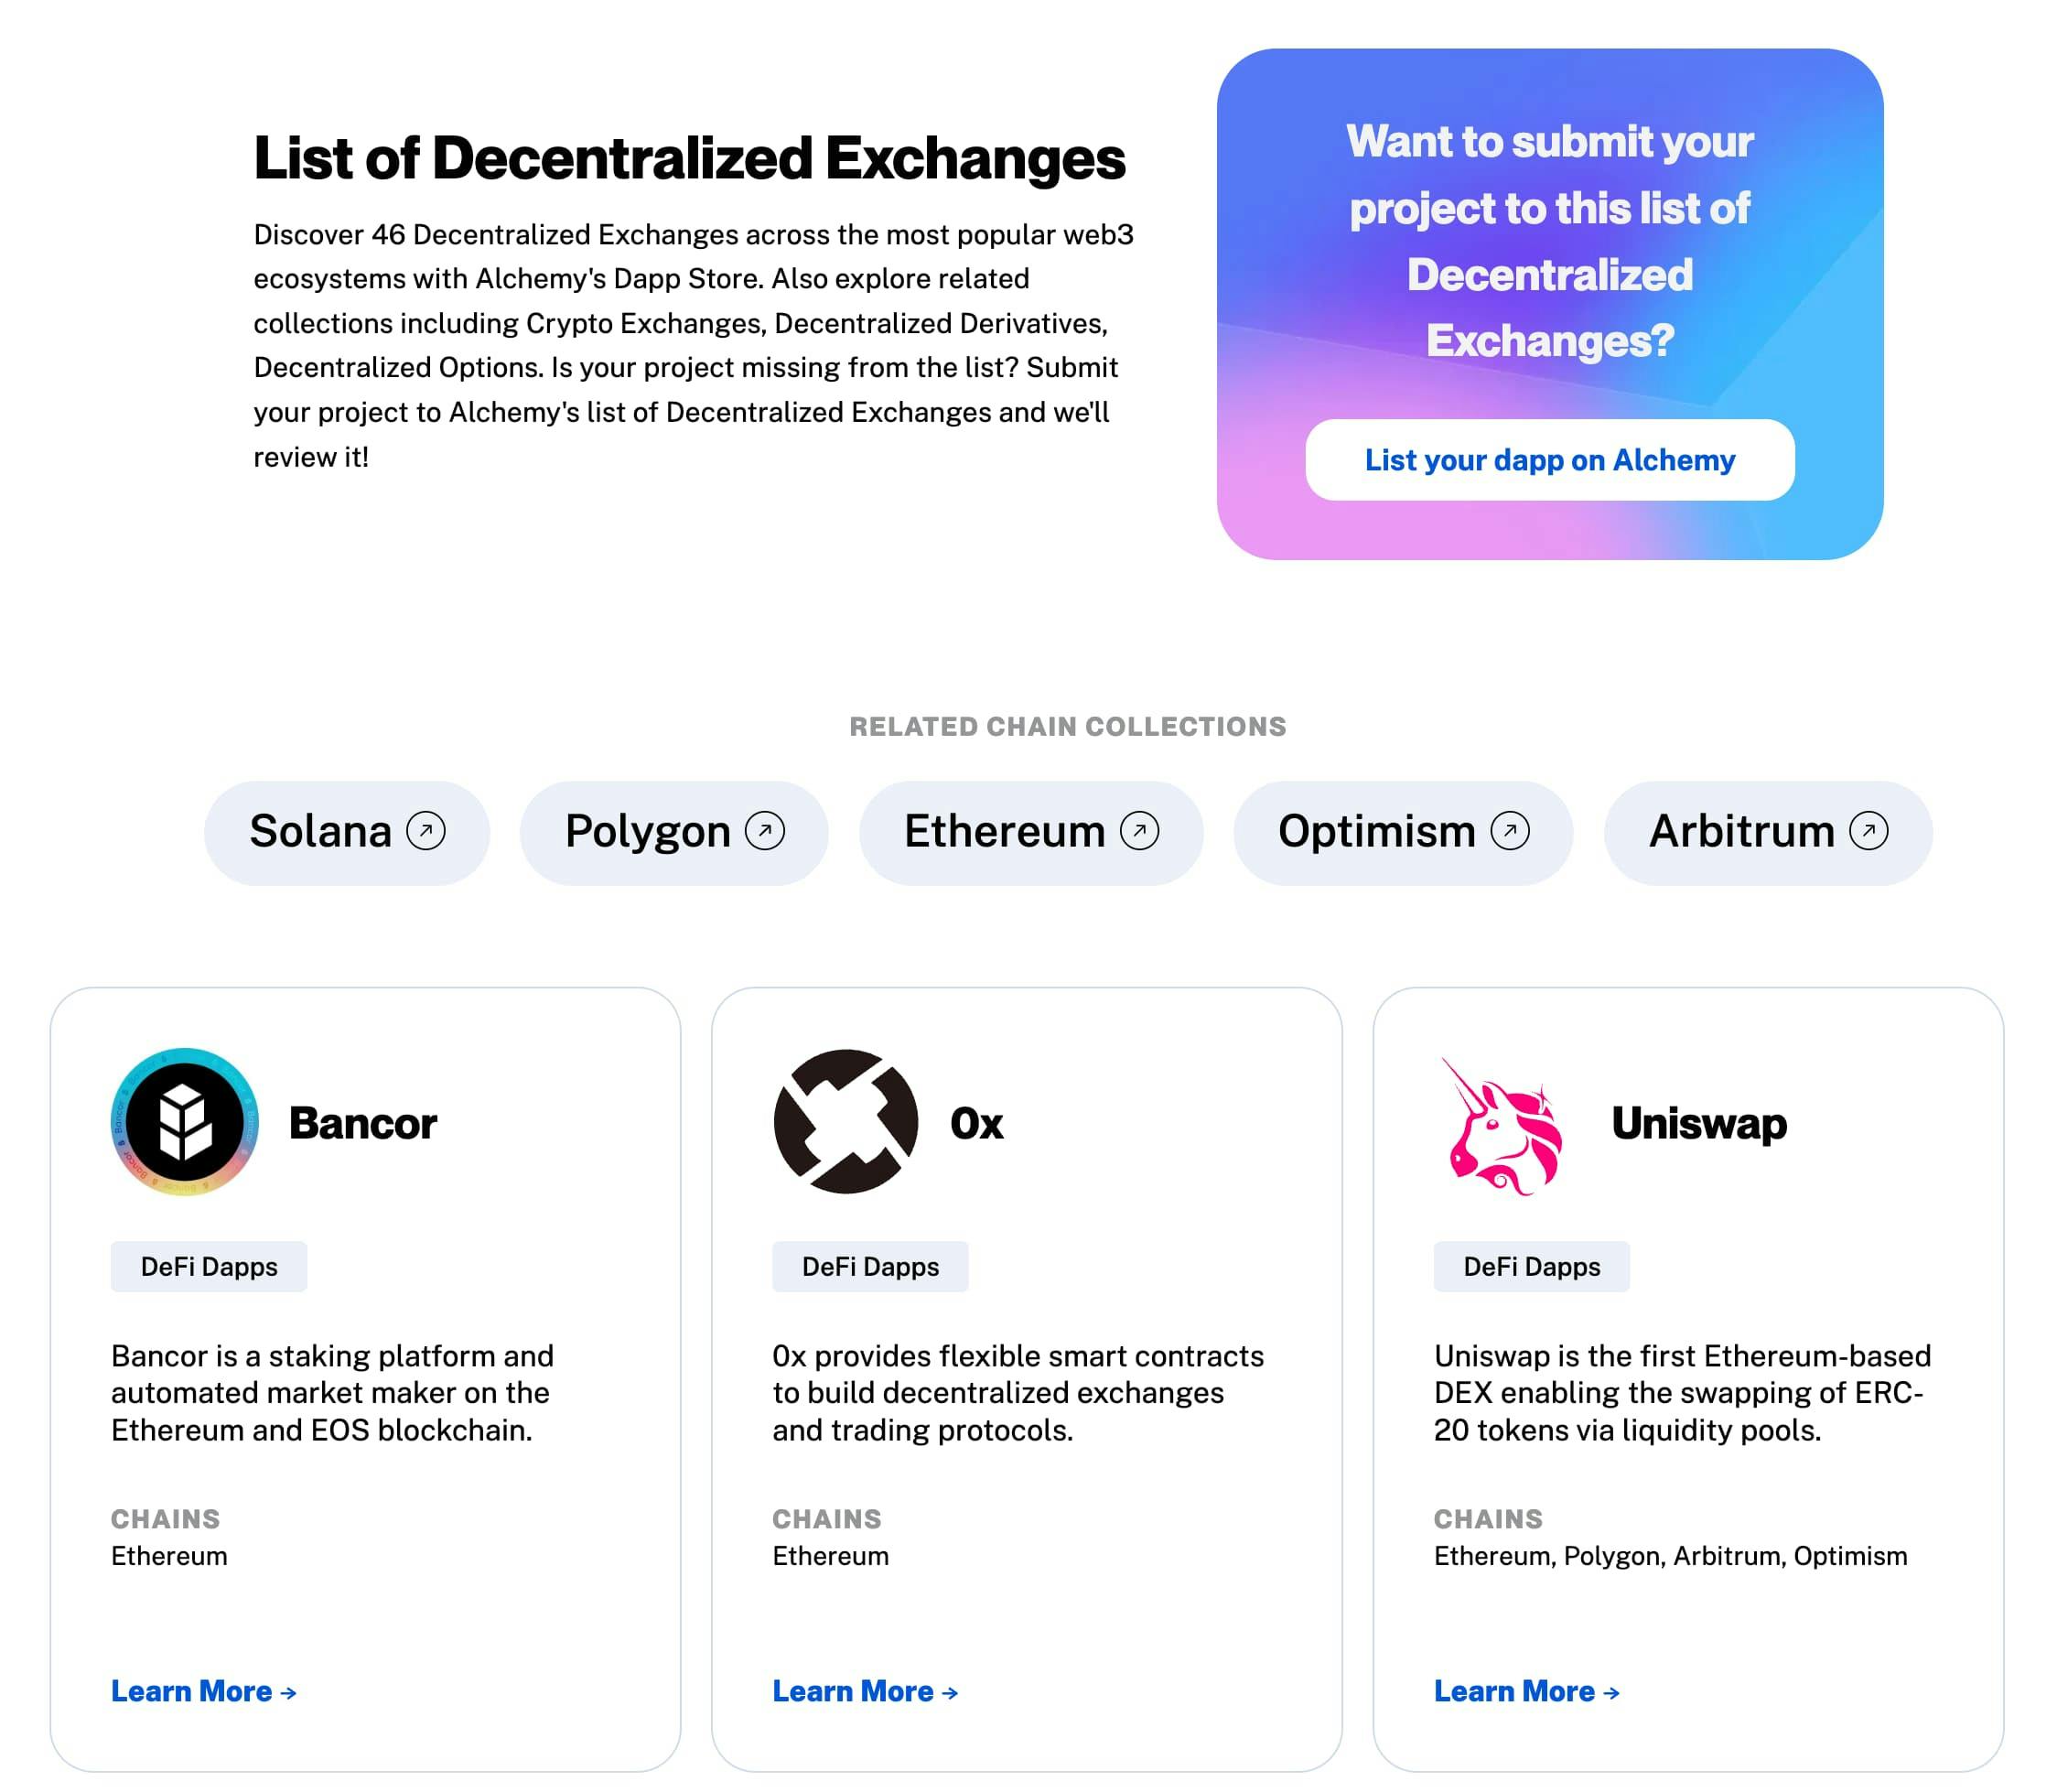 Niche category page featuring decentralized exchanges across different blockchains.